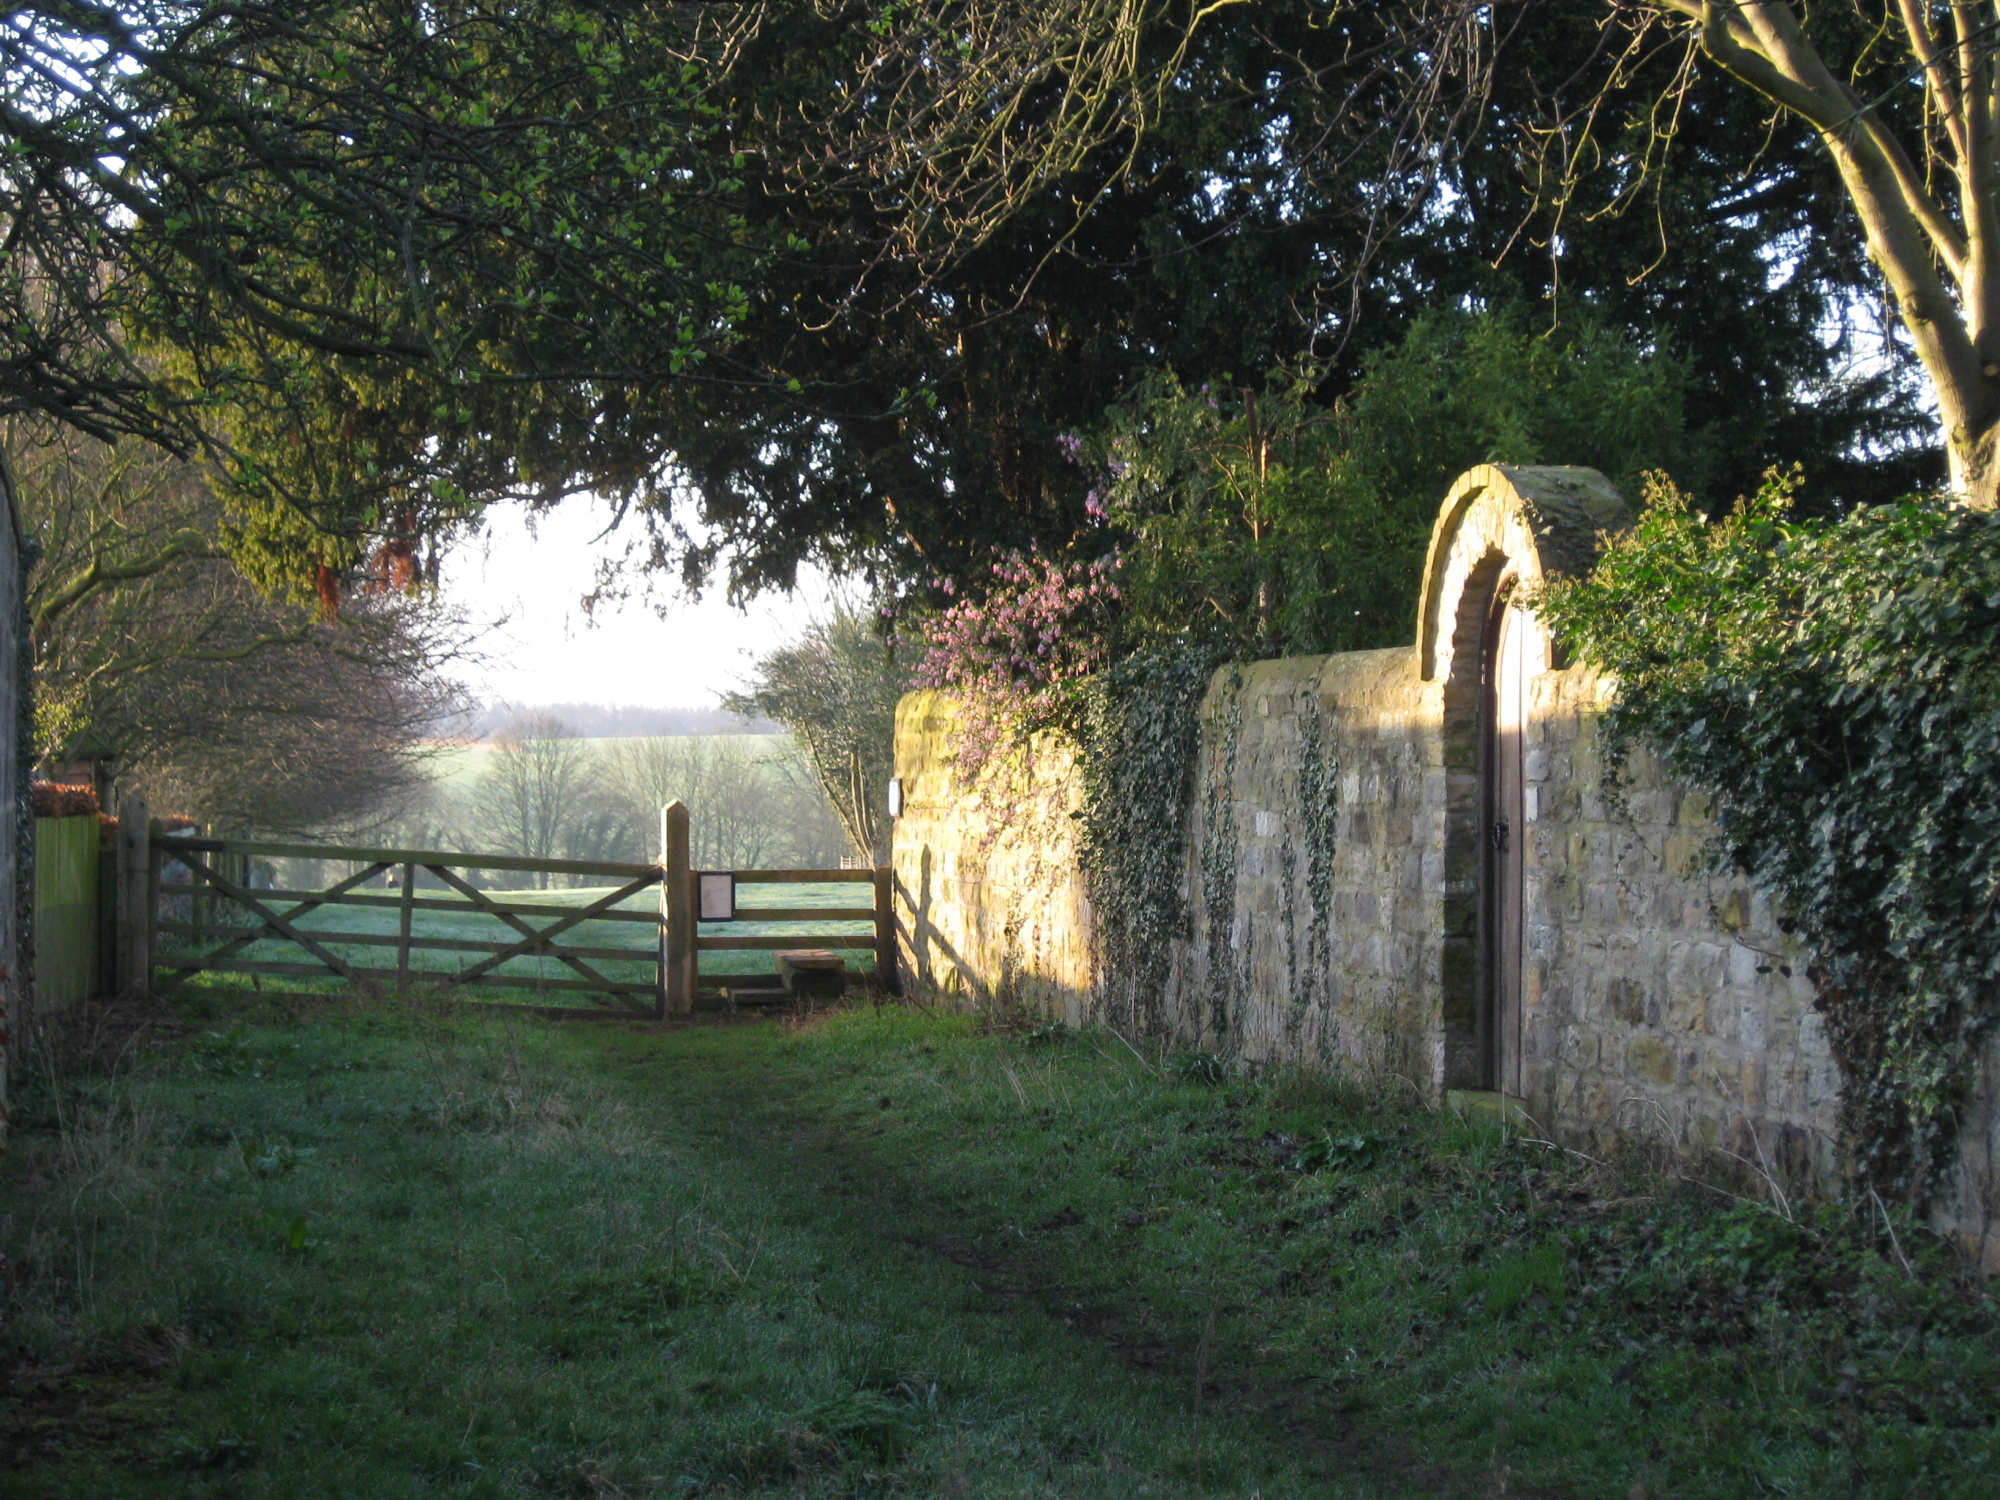 An entrance to the footpath that crosses Garth